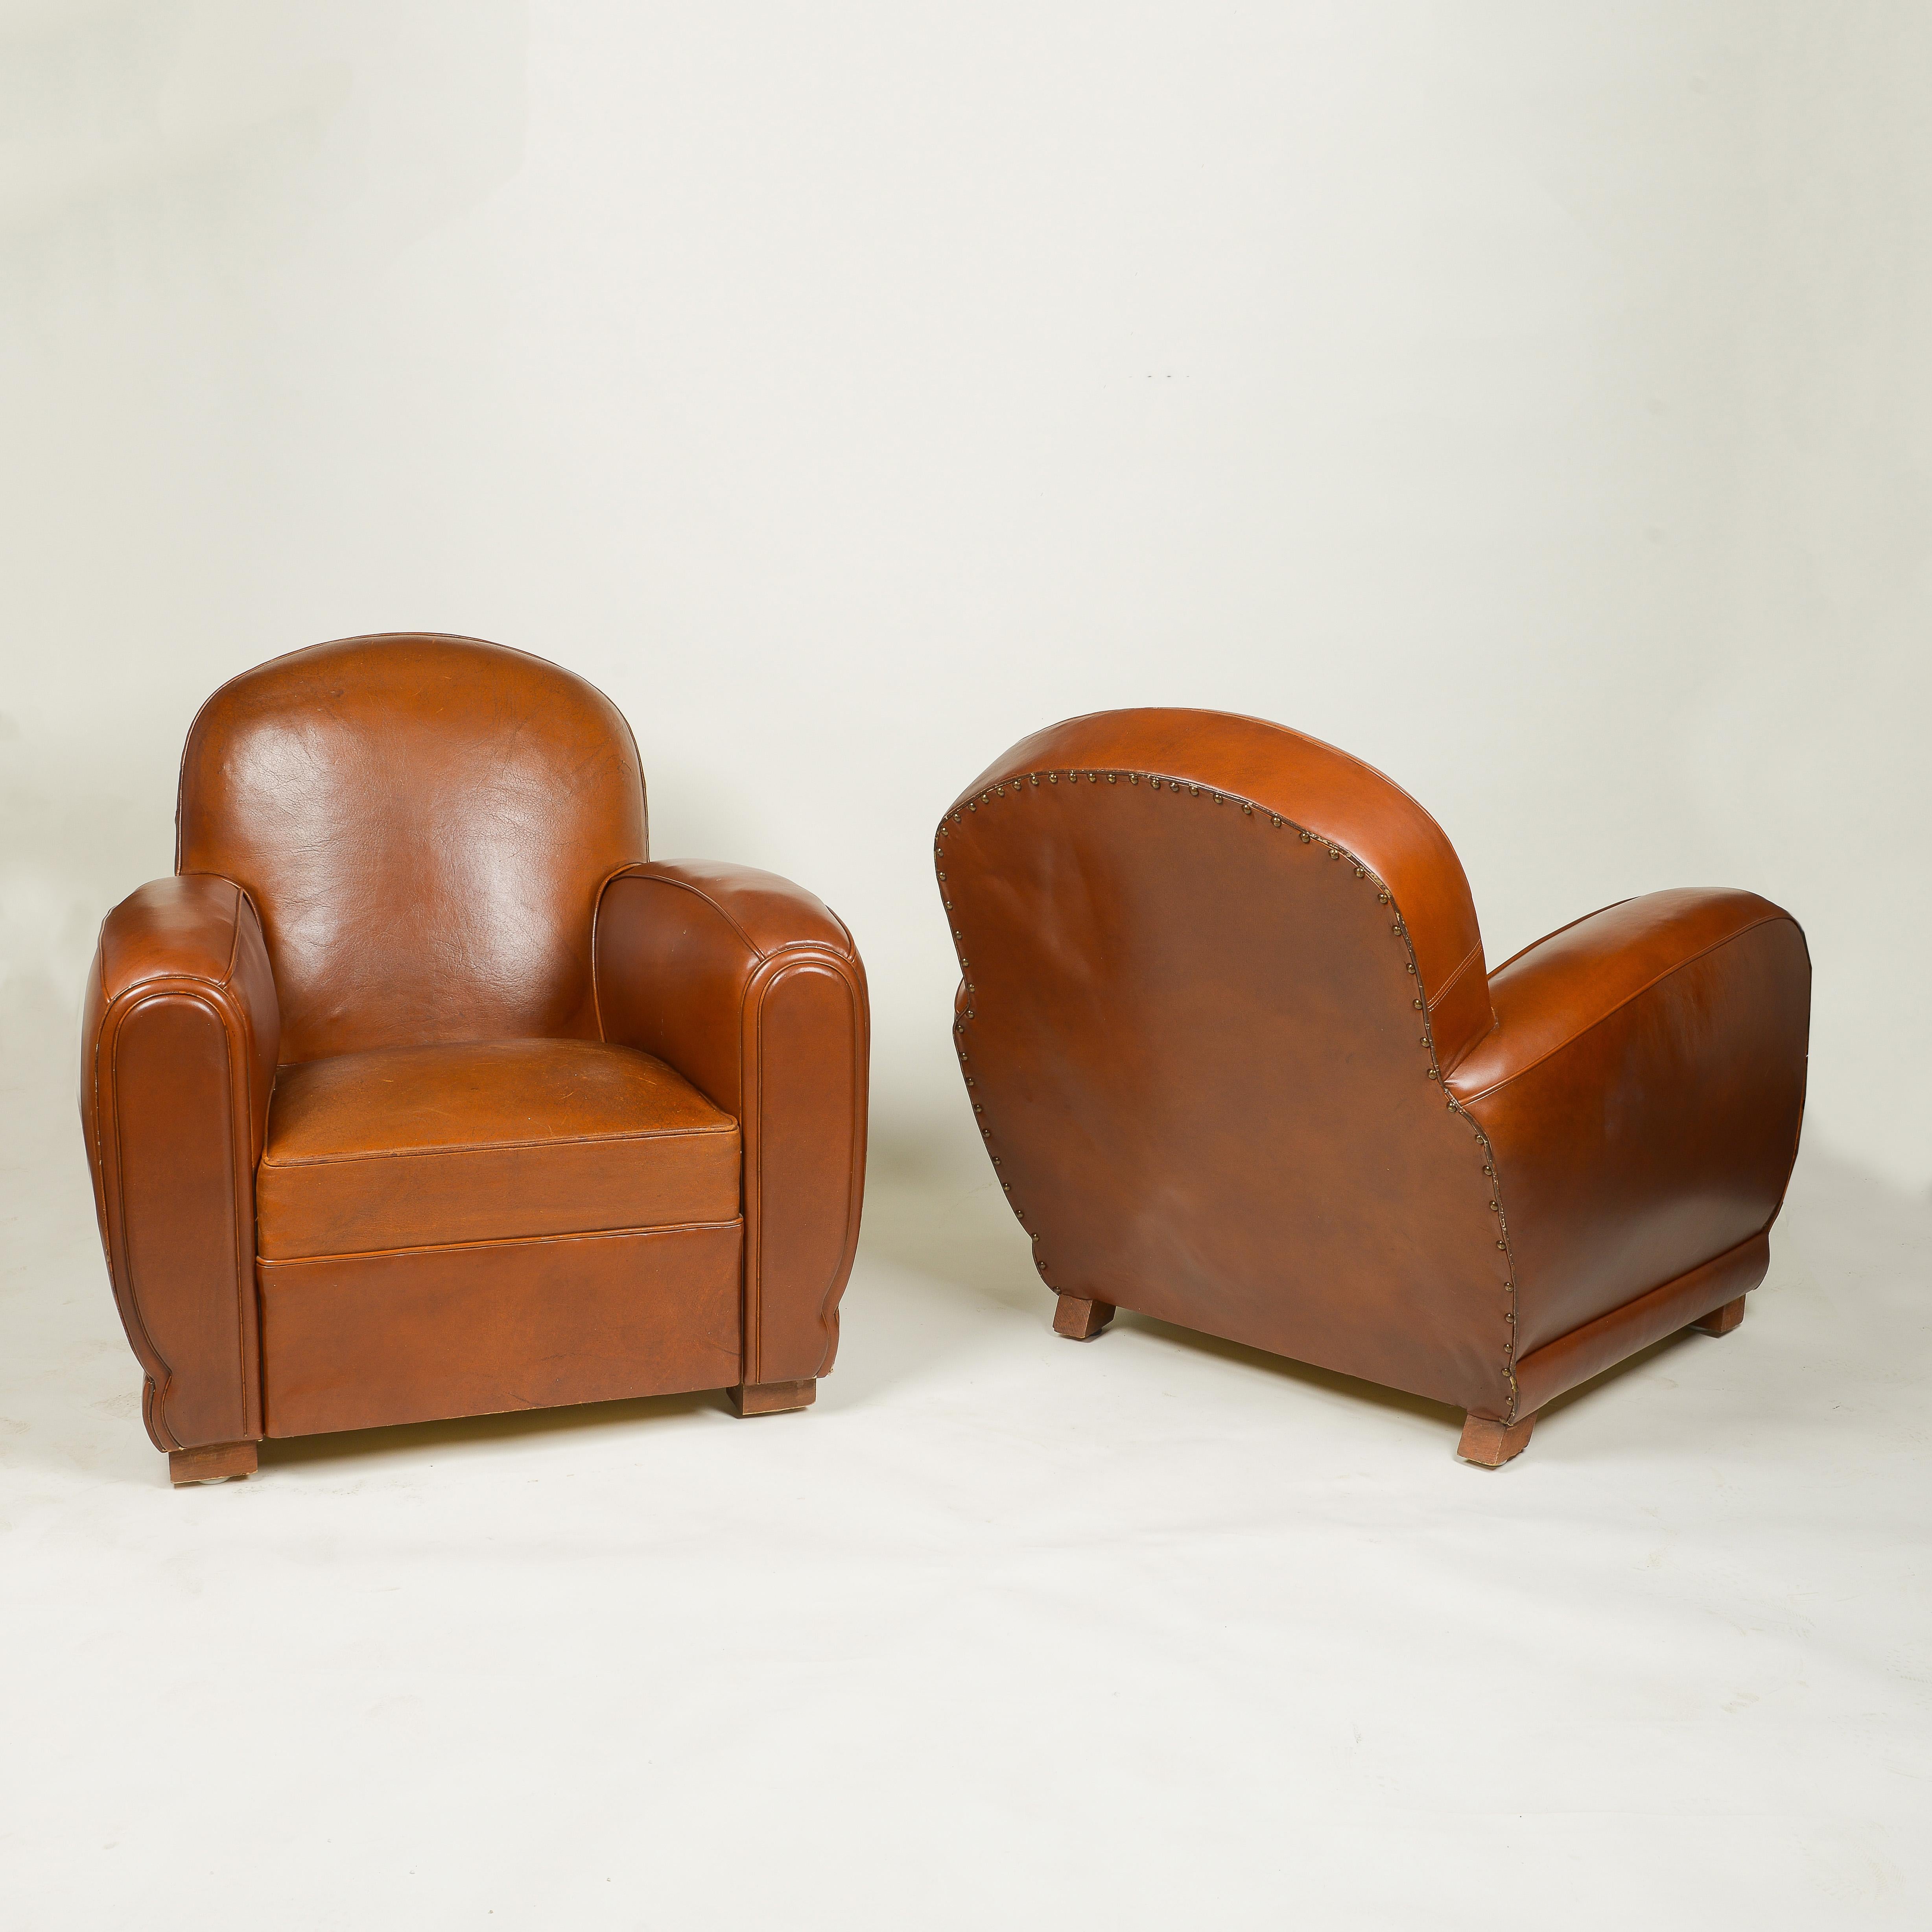 Each with rounded, angled back; on shaped maple feet; not overscaled; very attractive patina to leather.